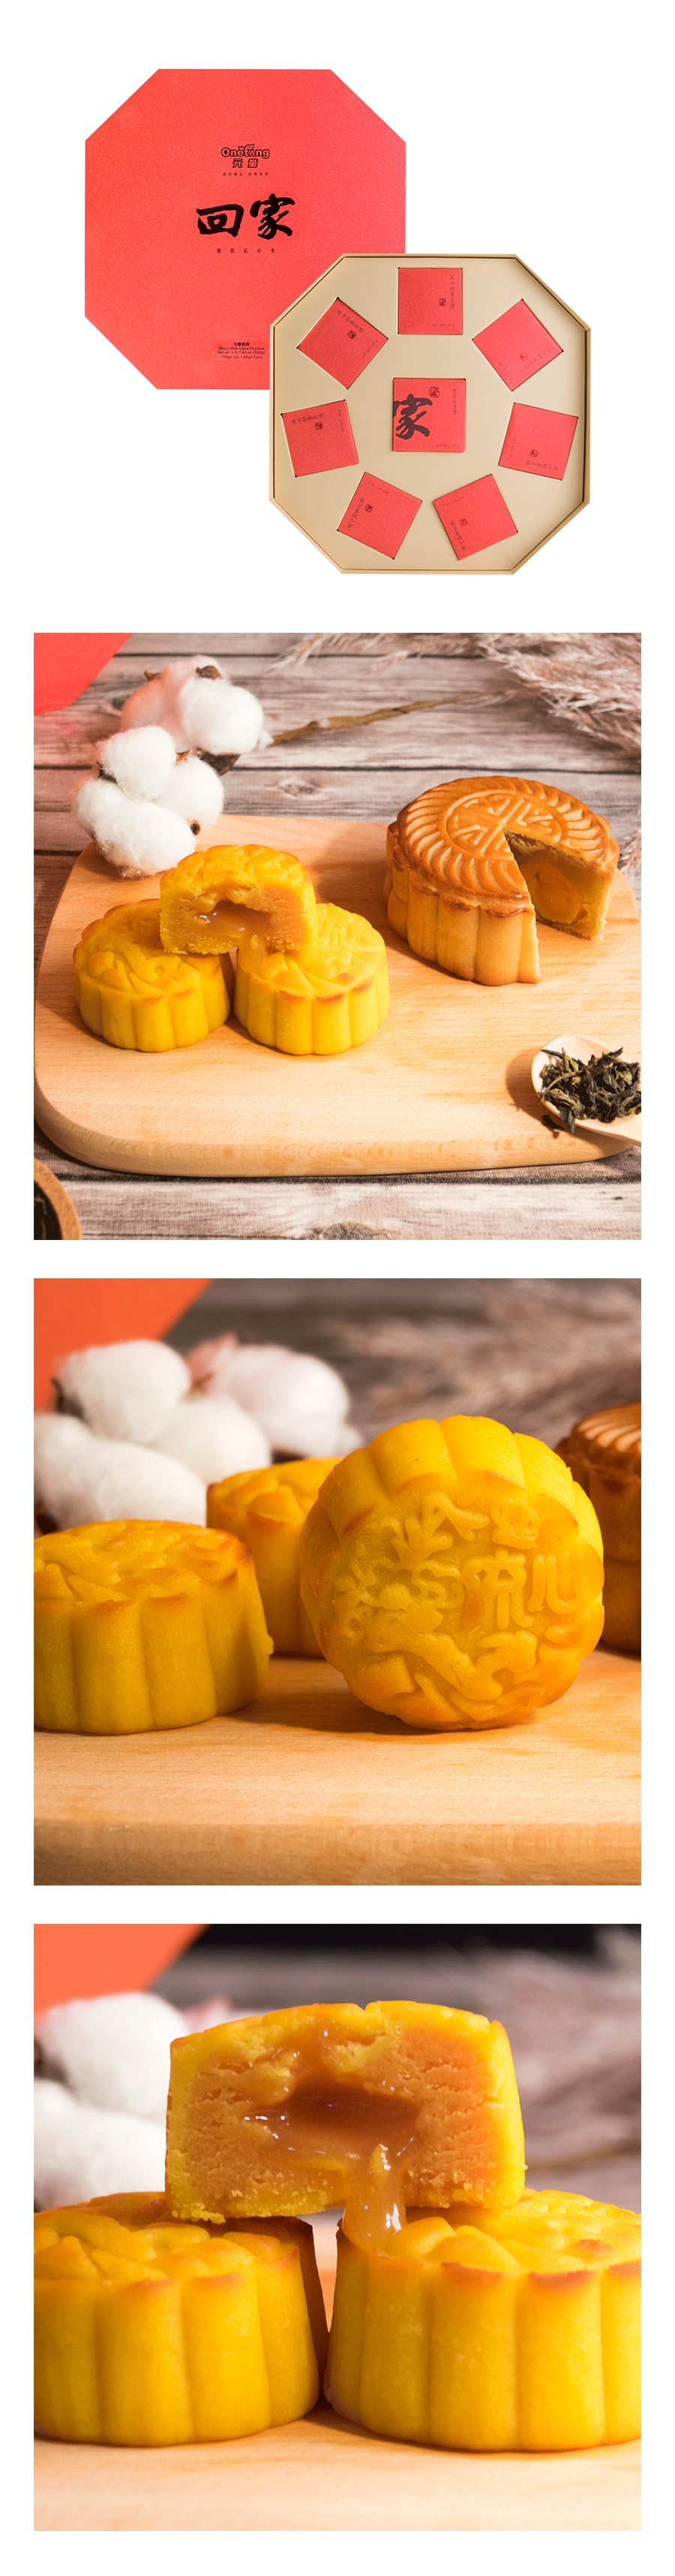 ONETONG Lava Custard Mooncake 8Pcs 500g 【Delivery Date: End of August】